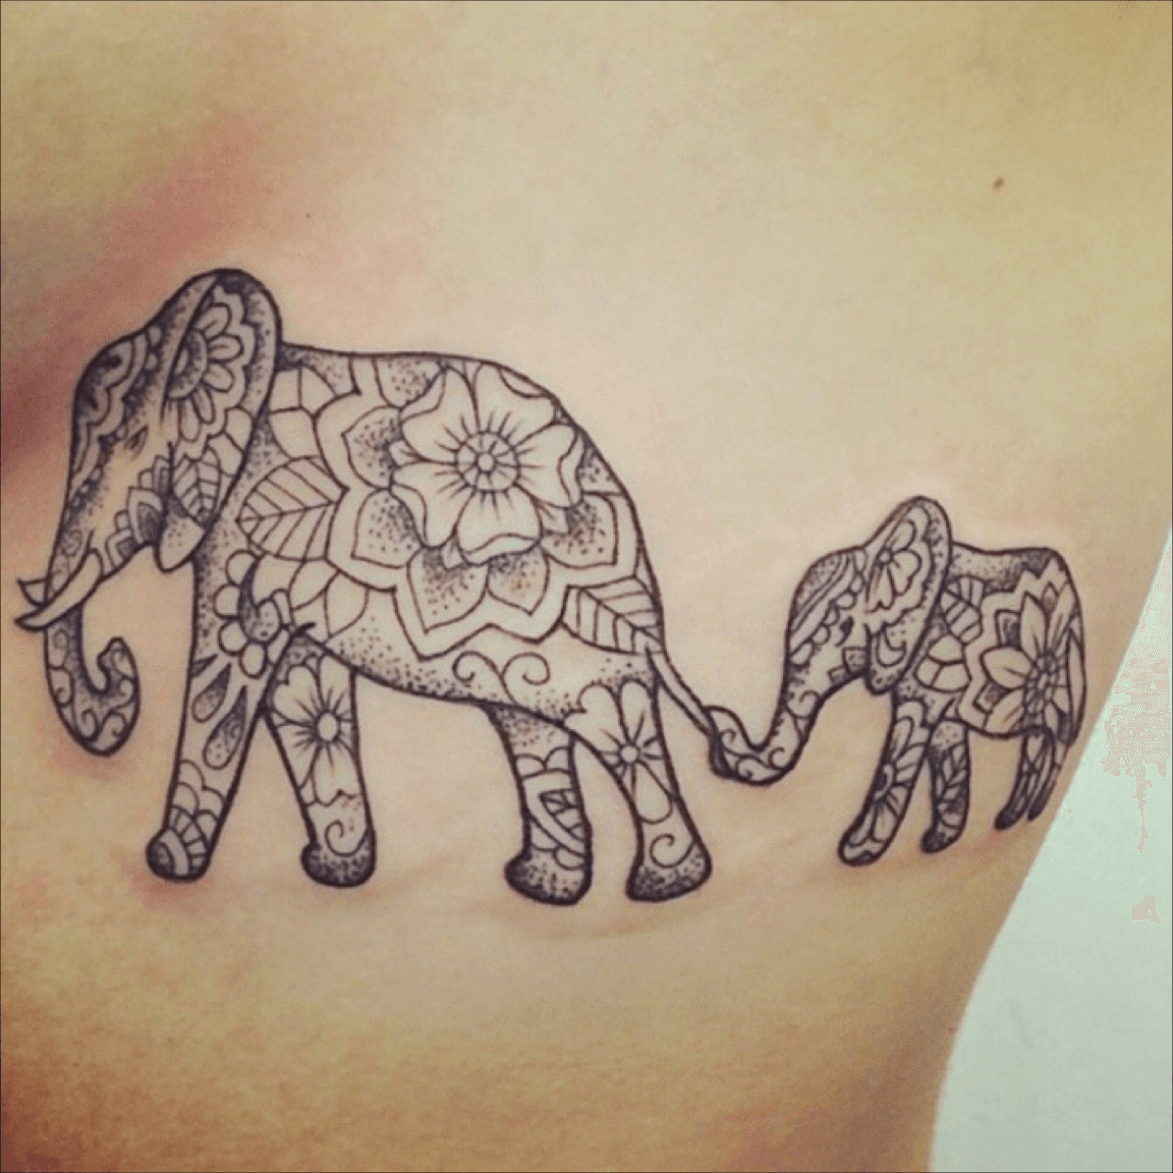 Tattoo uploaded by Tattoodo  Watercolor mother elephant and her baby by  Pfolkes IGpstrokestattoos elephant Pfolkes watercolor  Tattoodo